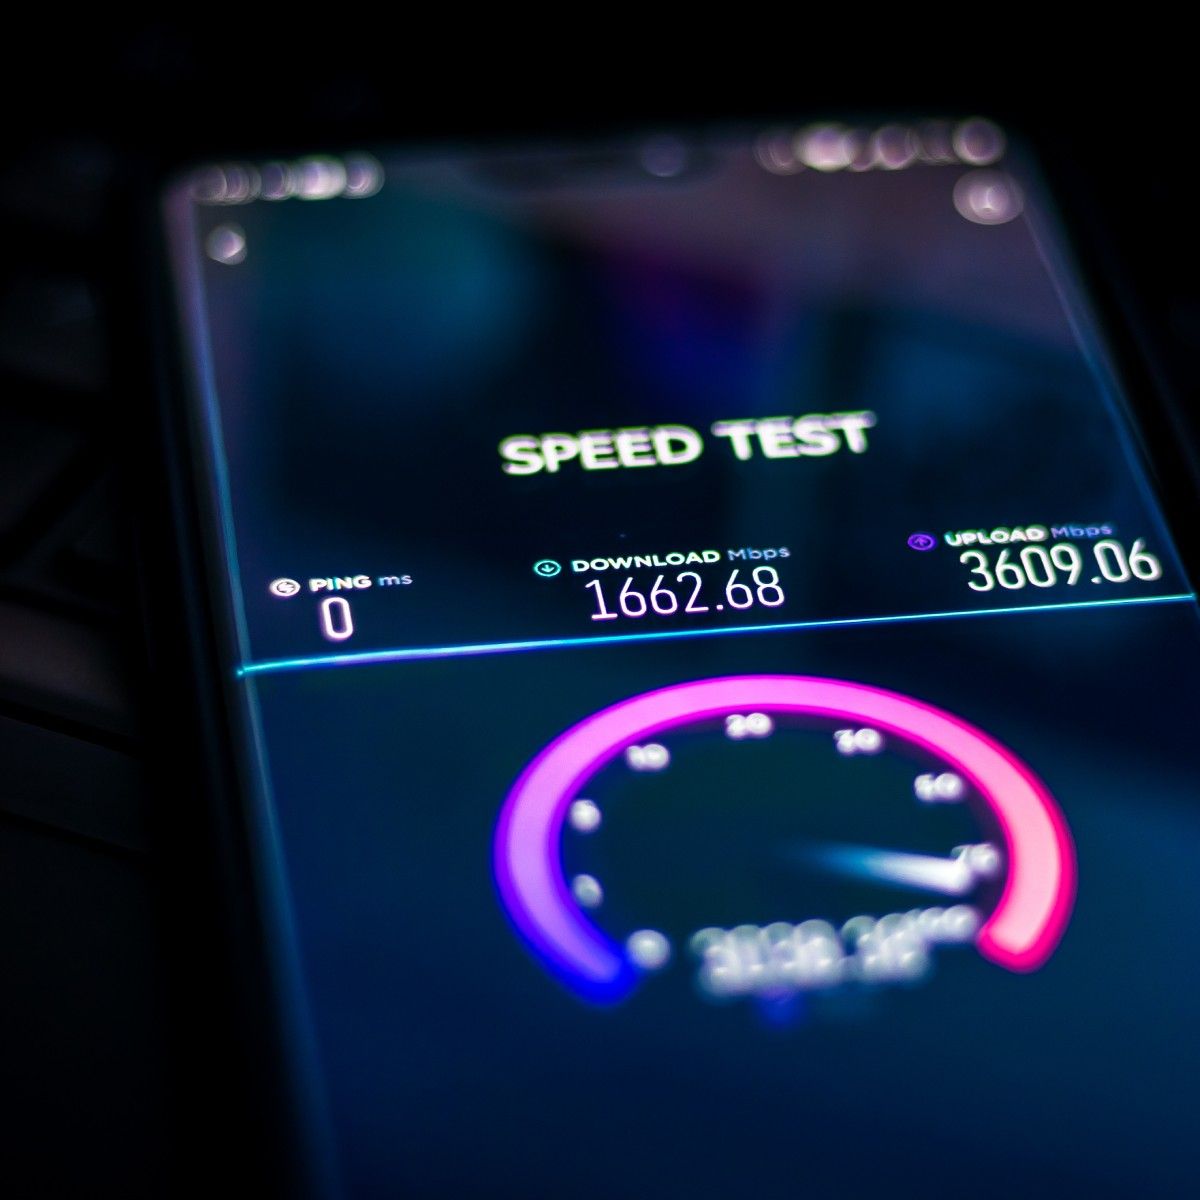 A close-up of a cell phone screen showing an internet speed test result with 0 ping, 1,662 Mbps download speed, and 3,609 Mbps upload speed.